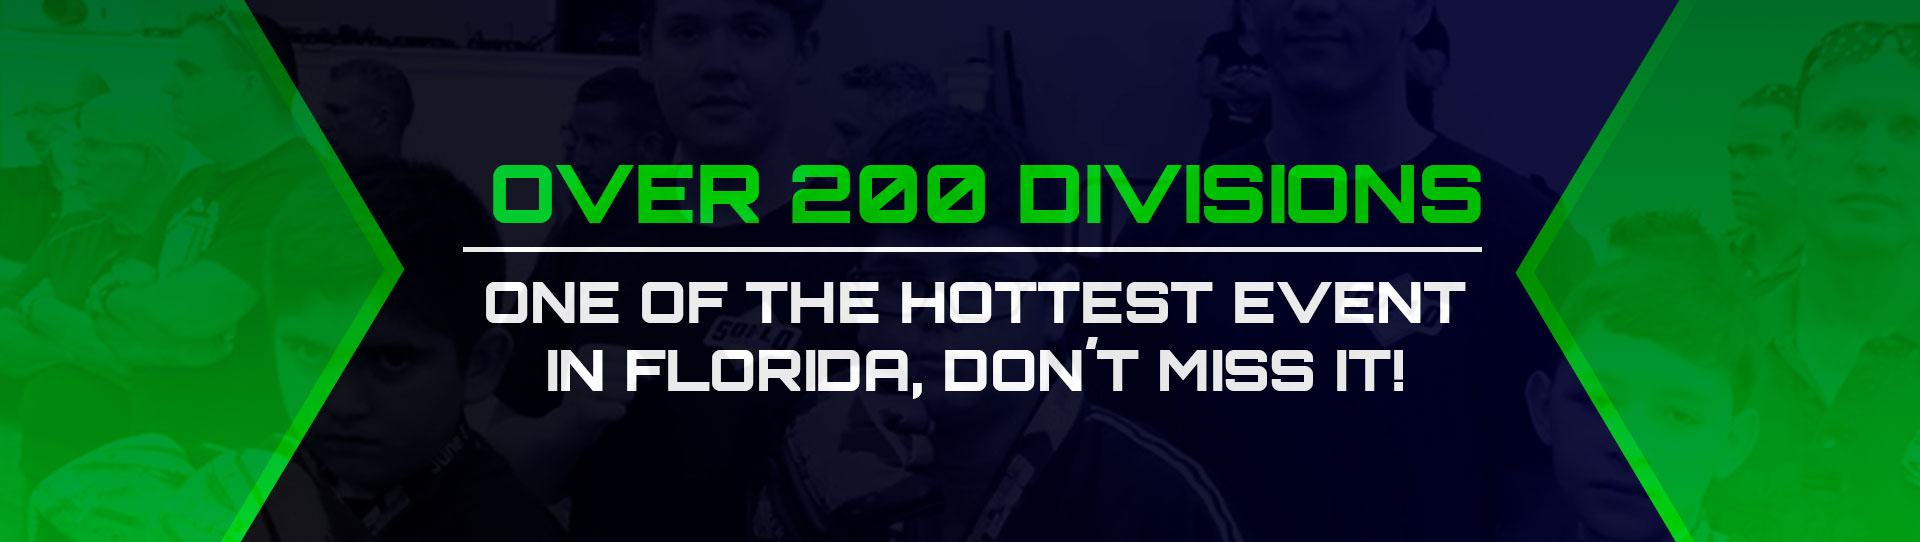 Banner-over-200-divisions